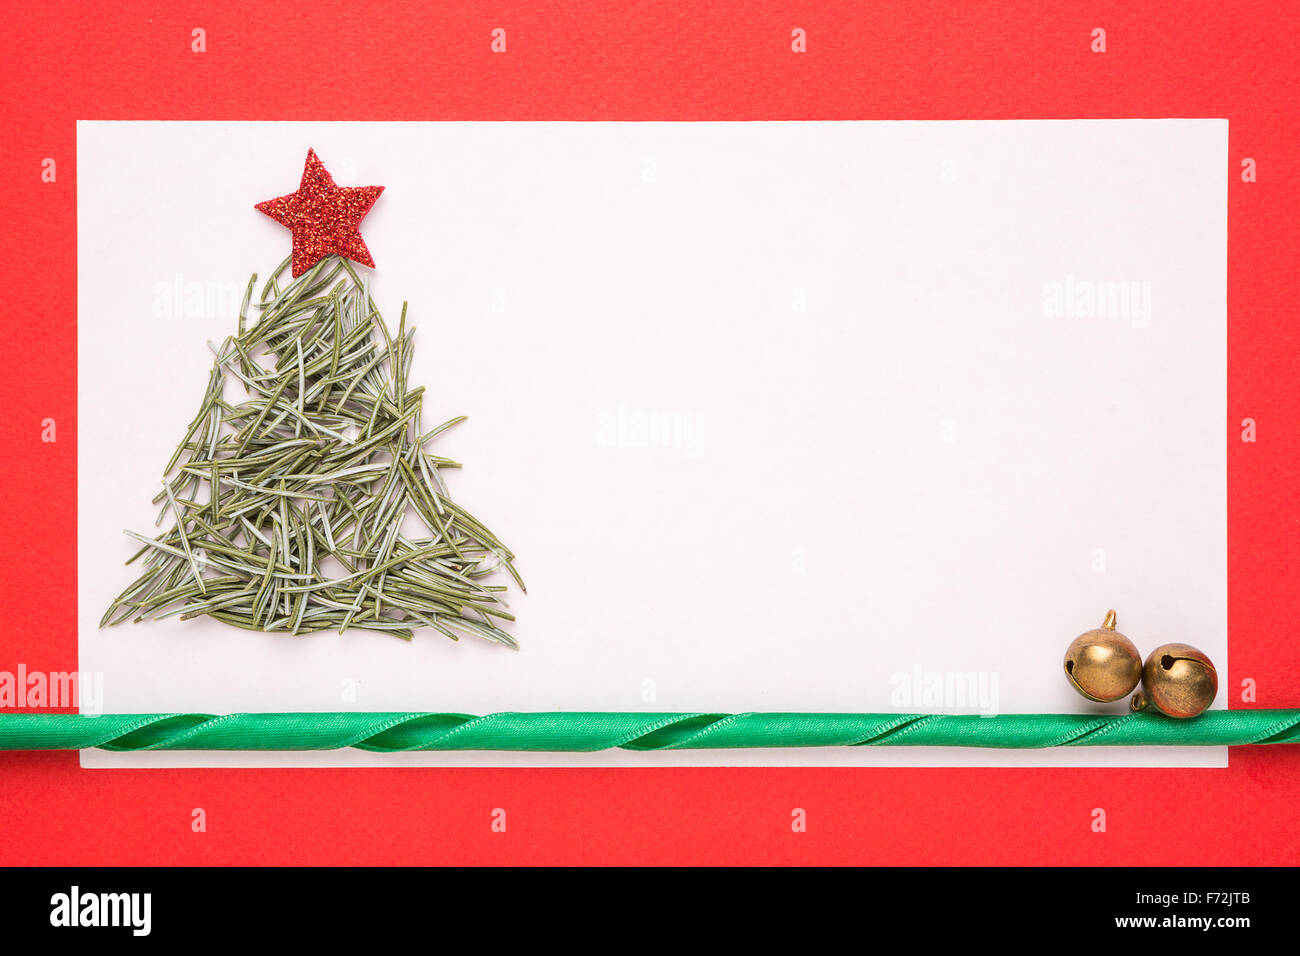 Blank Christmas card or invitation with christmas tree made from pine needles on red background Stock Photo